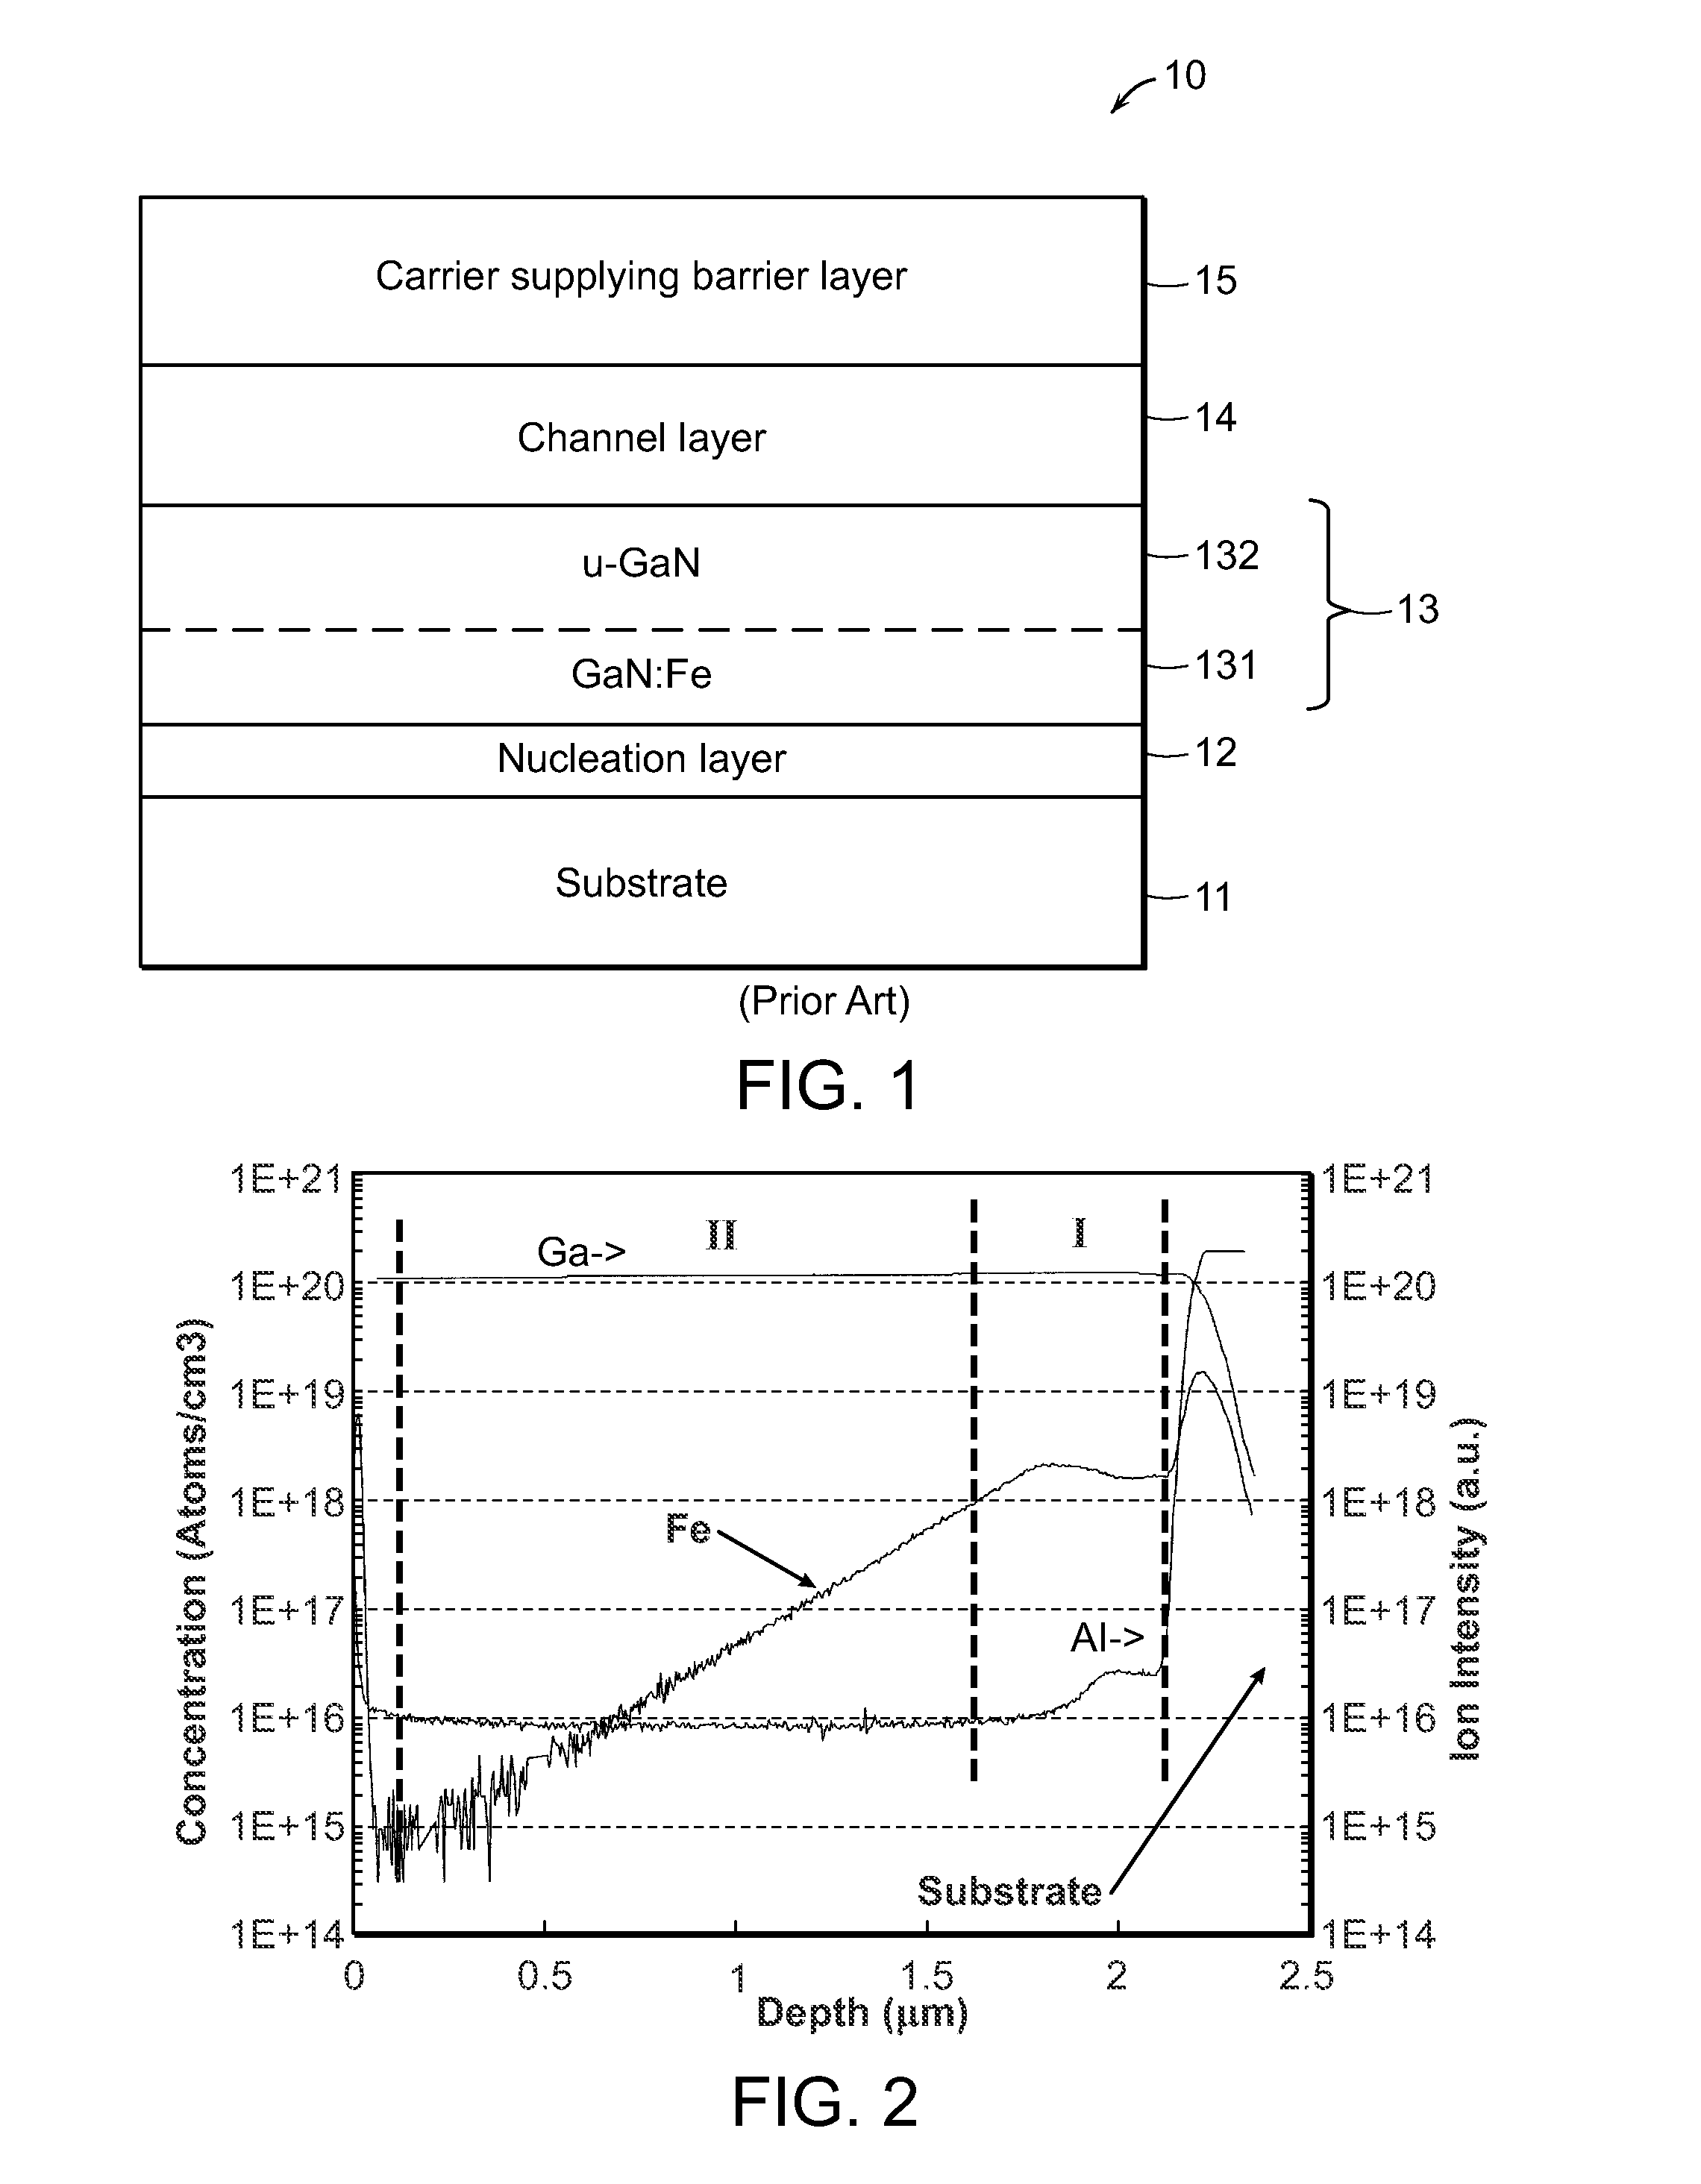 HEMT Structure with Iron-Doping-Stop Component and Methods of Forming